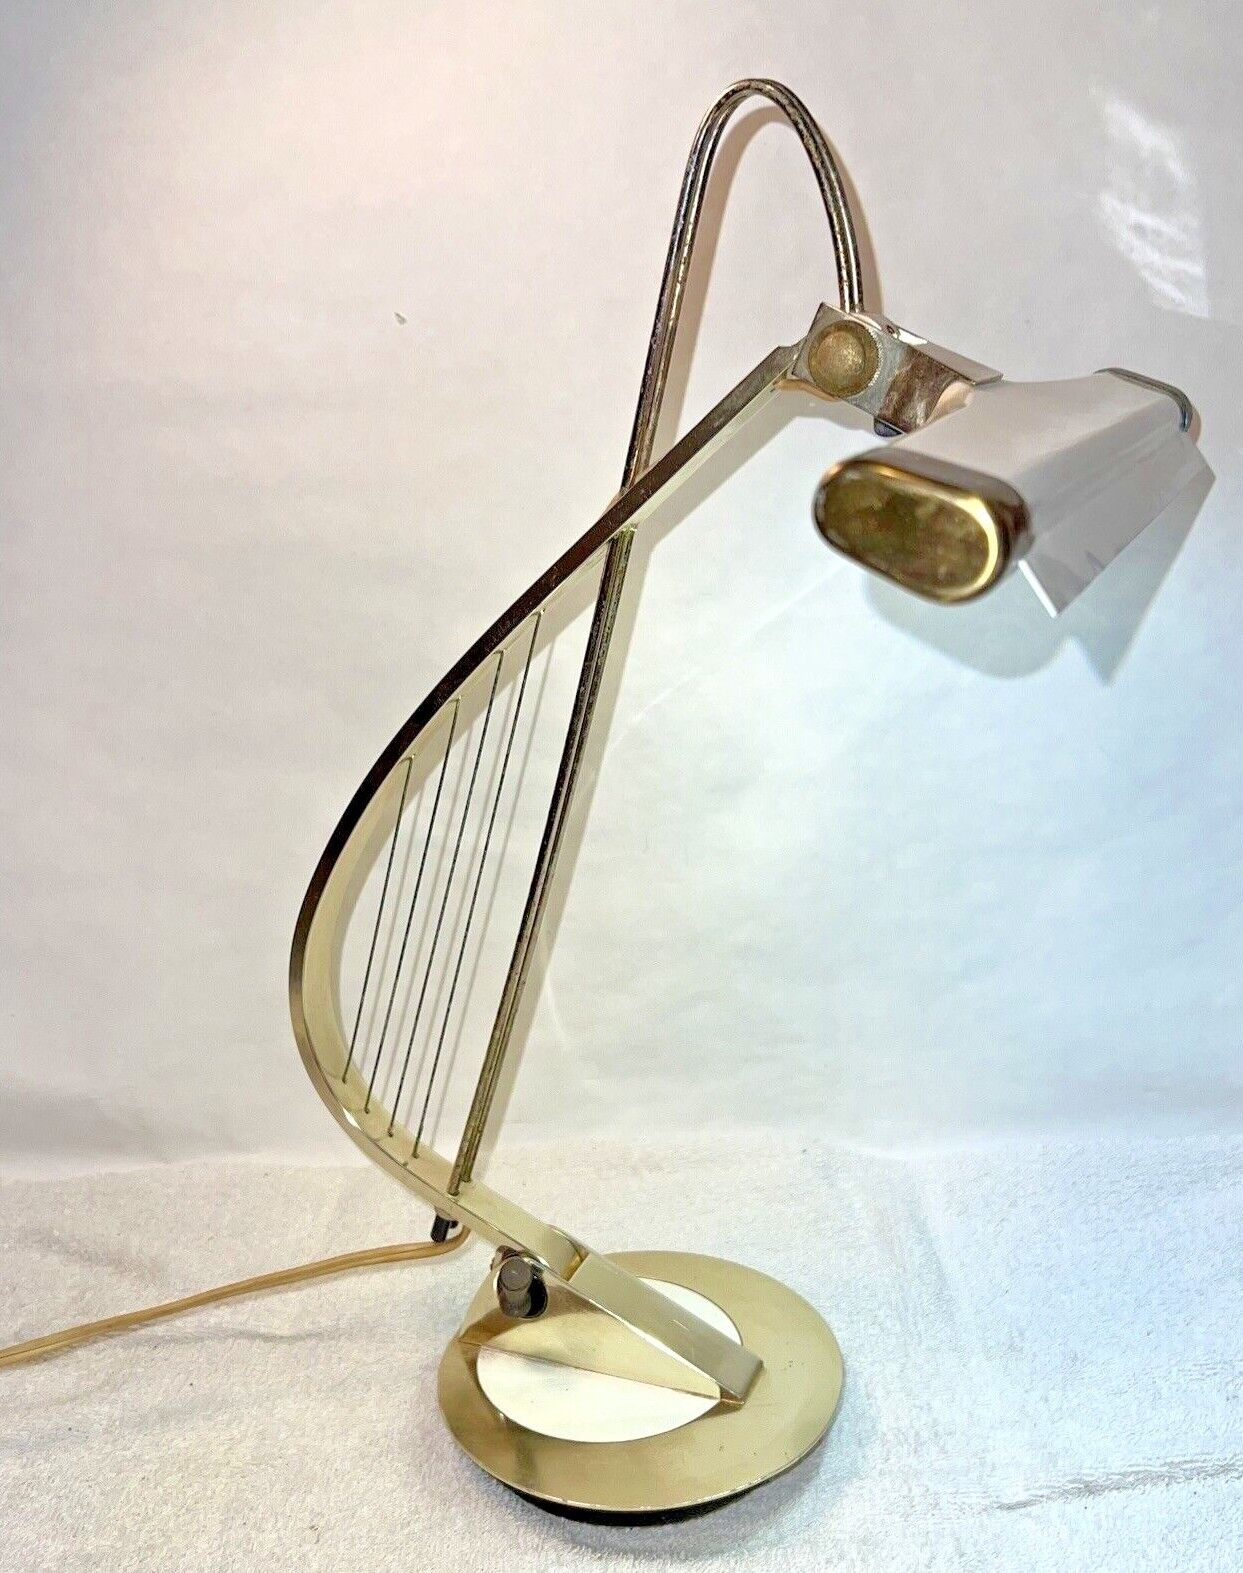 Cool vintage Cannon Harp Piano Desk Lamp Mid Century Modern as seen on Mad Men